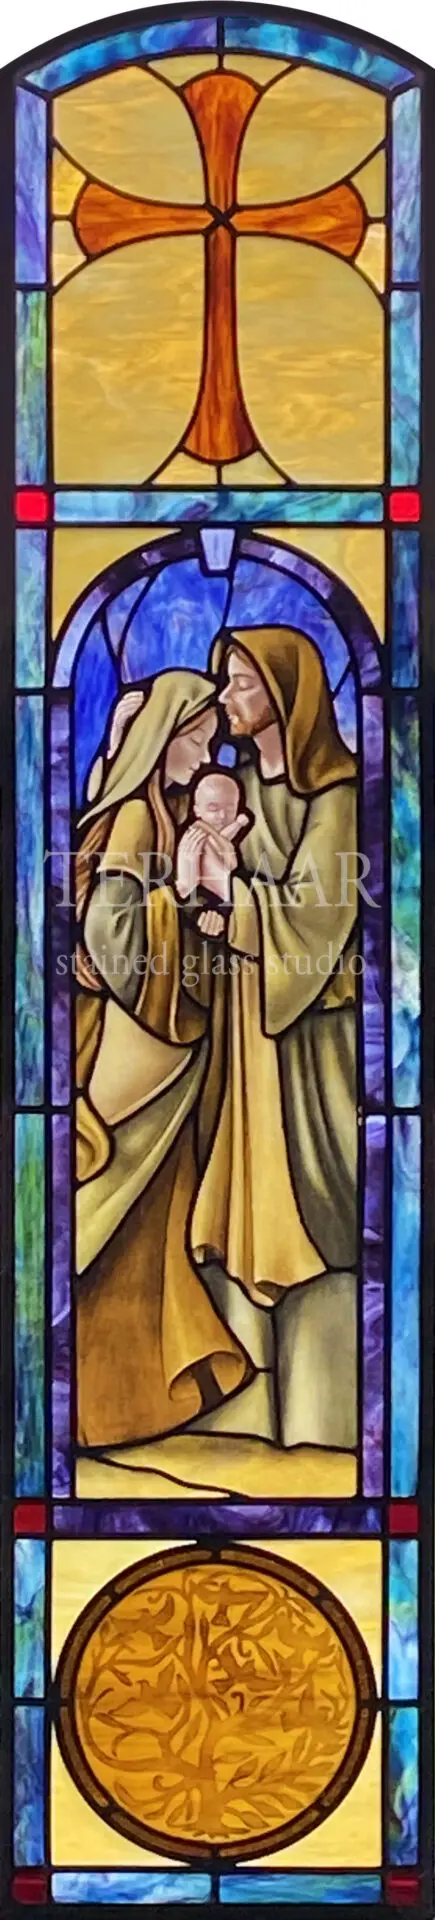 mary-joseph-and-baby-jesus-stained glass window